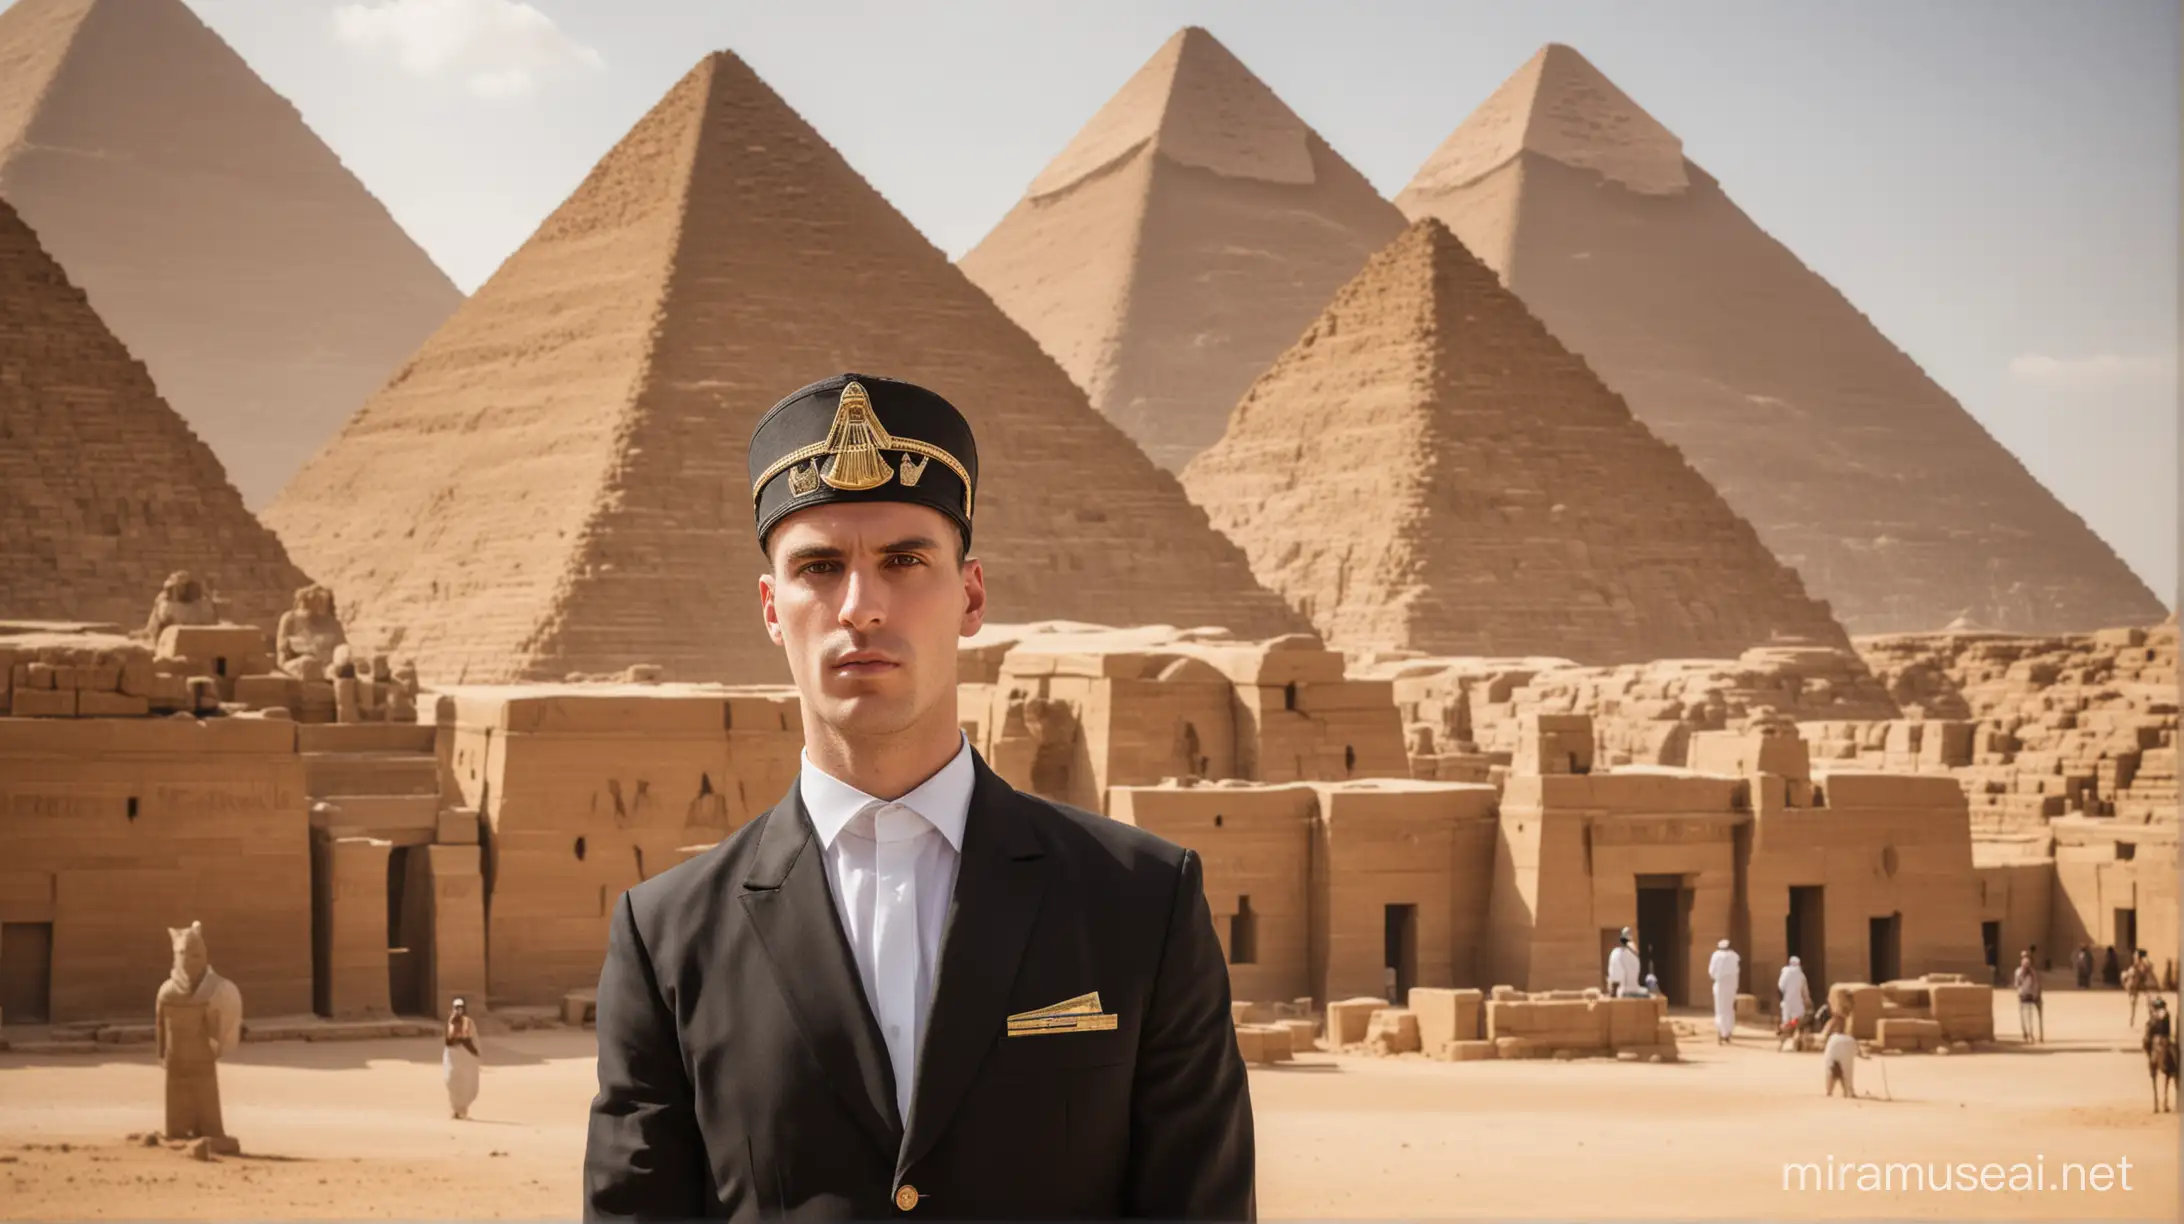 Dignified Security Guard in Pharaoh Hat amidst Ancient Egyptian Pyramids